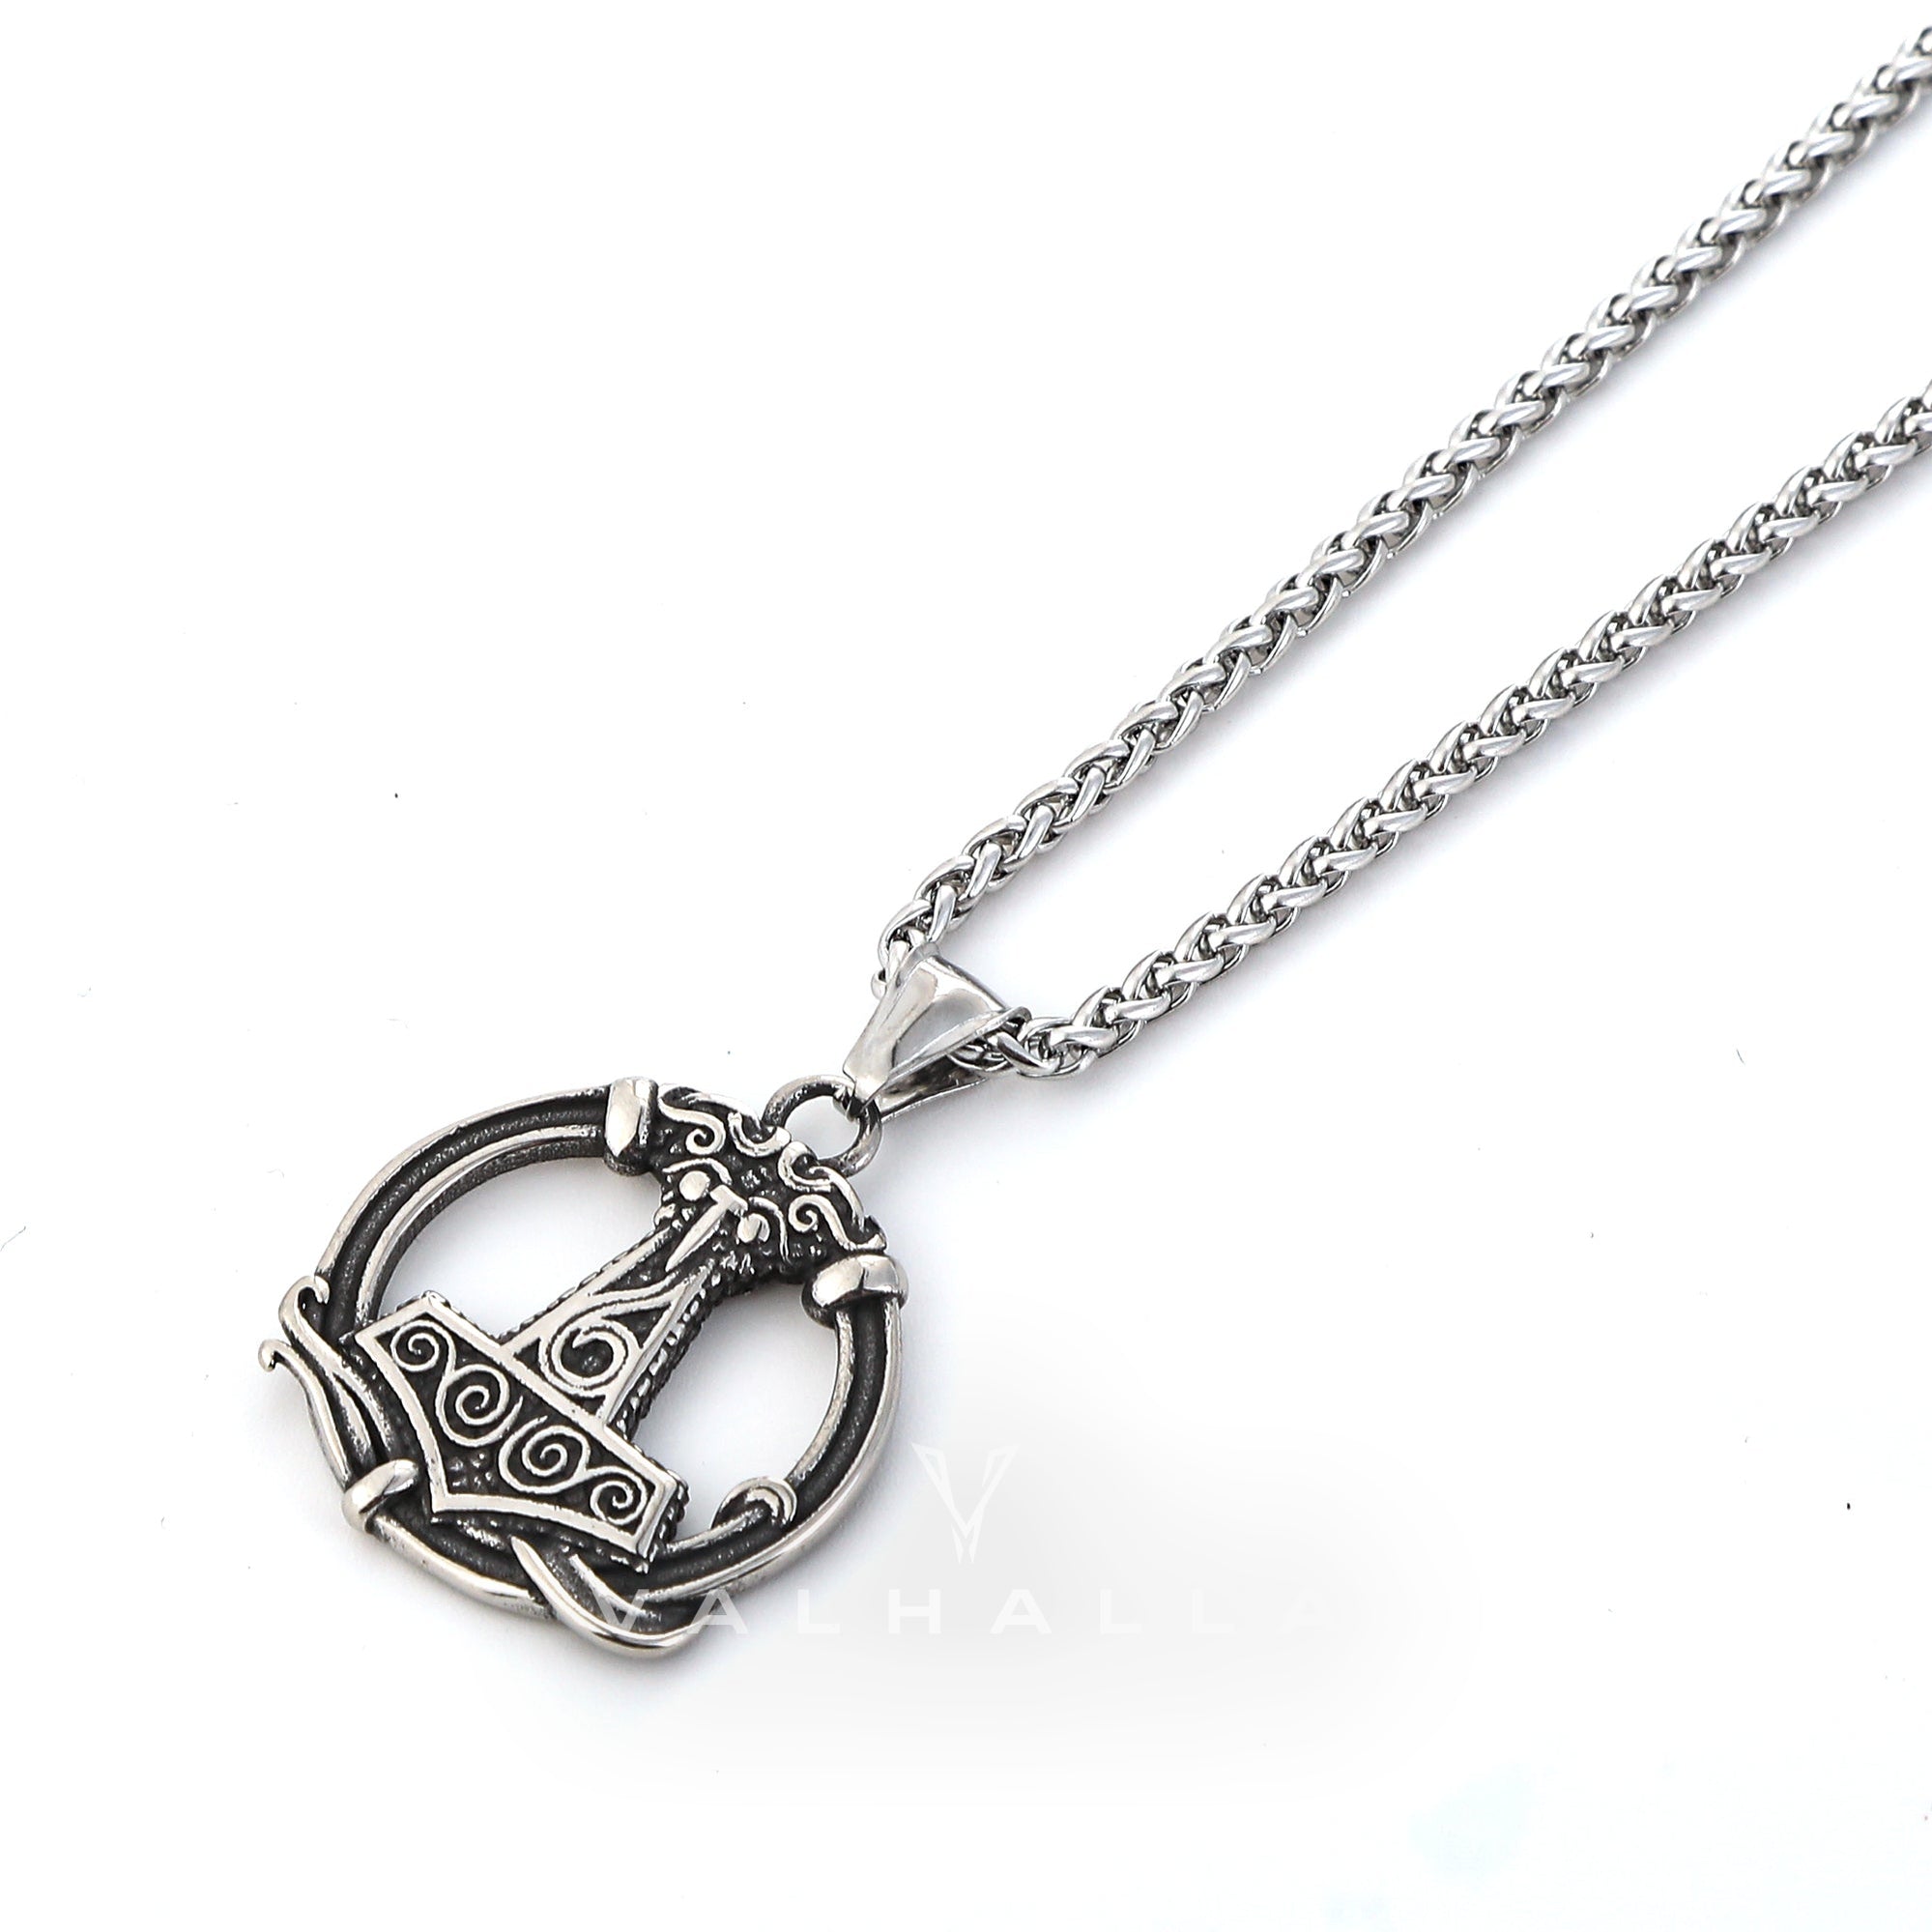 Handcrafted Stainless Steel Thor's Hammer Circular Necklace